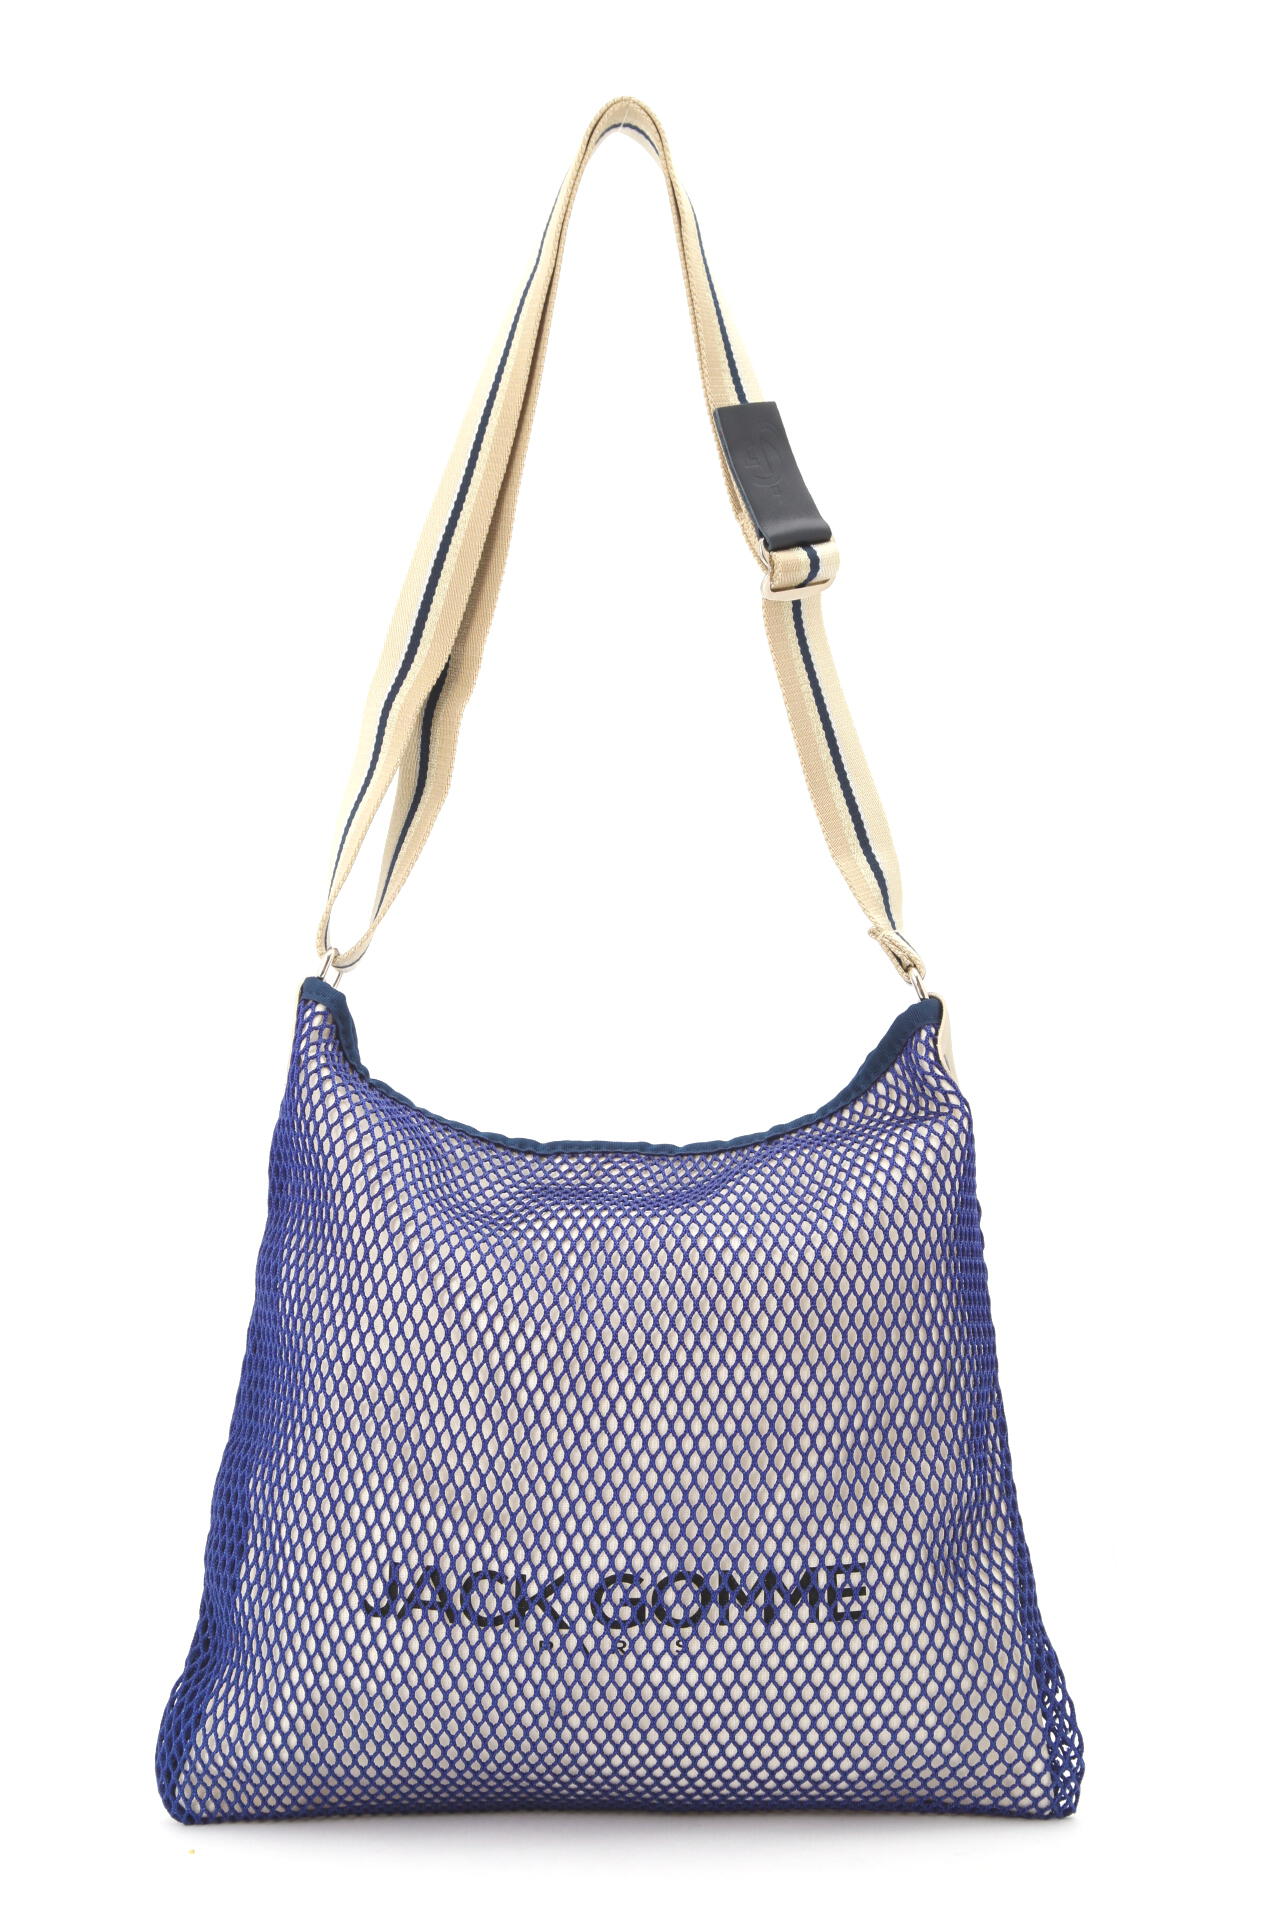 【JACK GOMME】ロゴトートバッグ